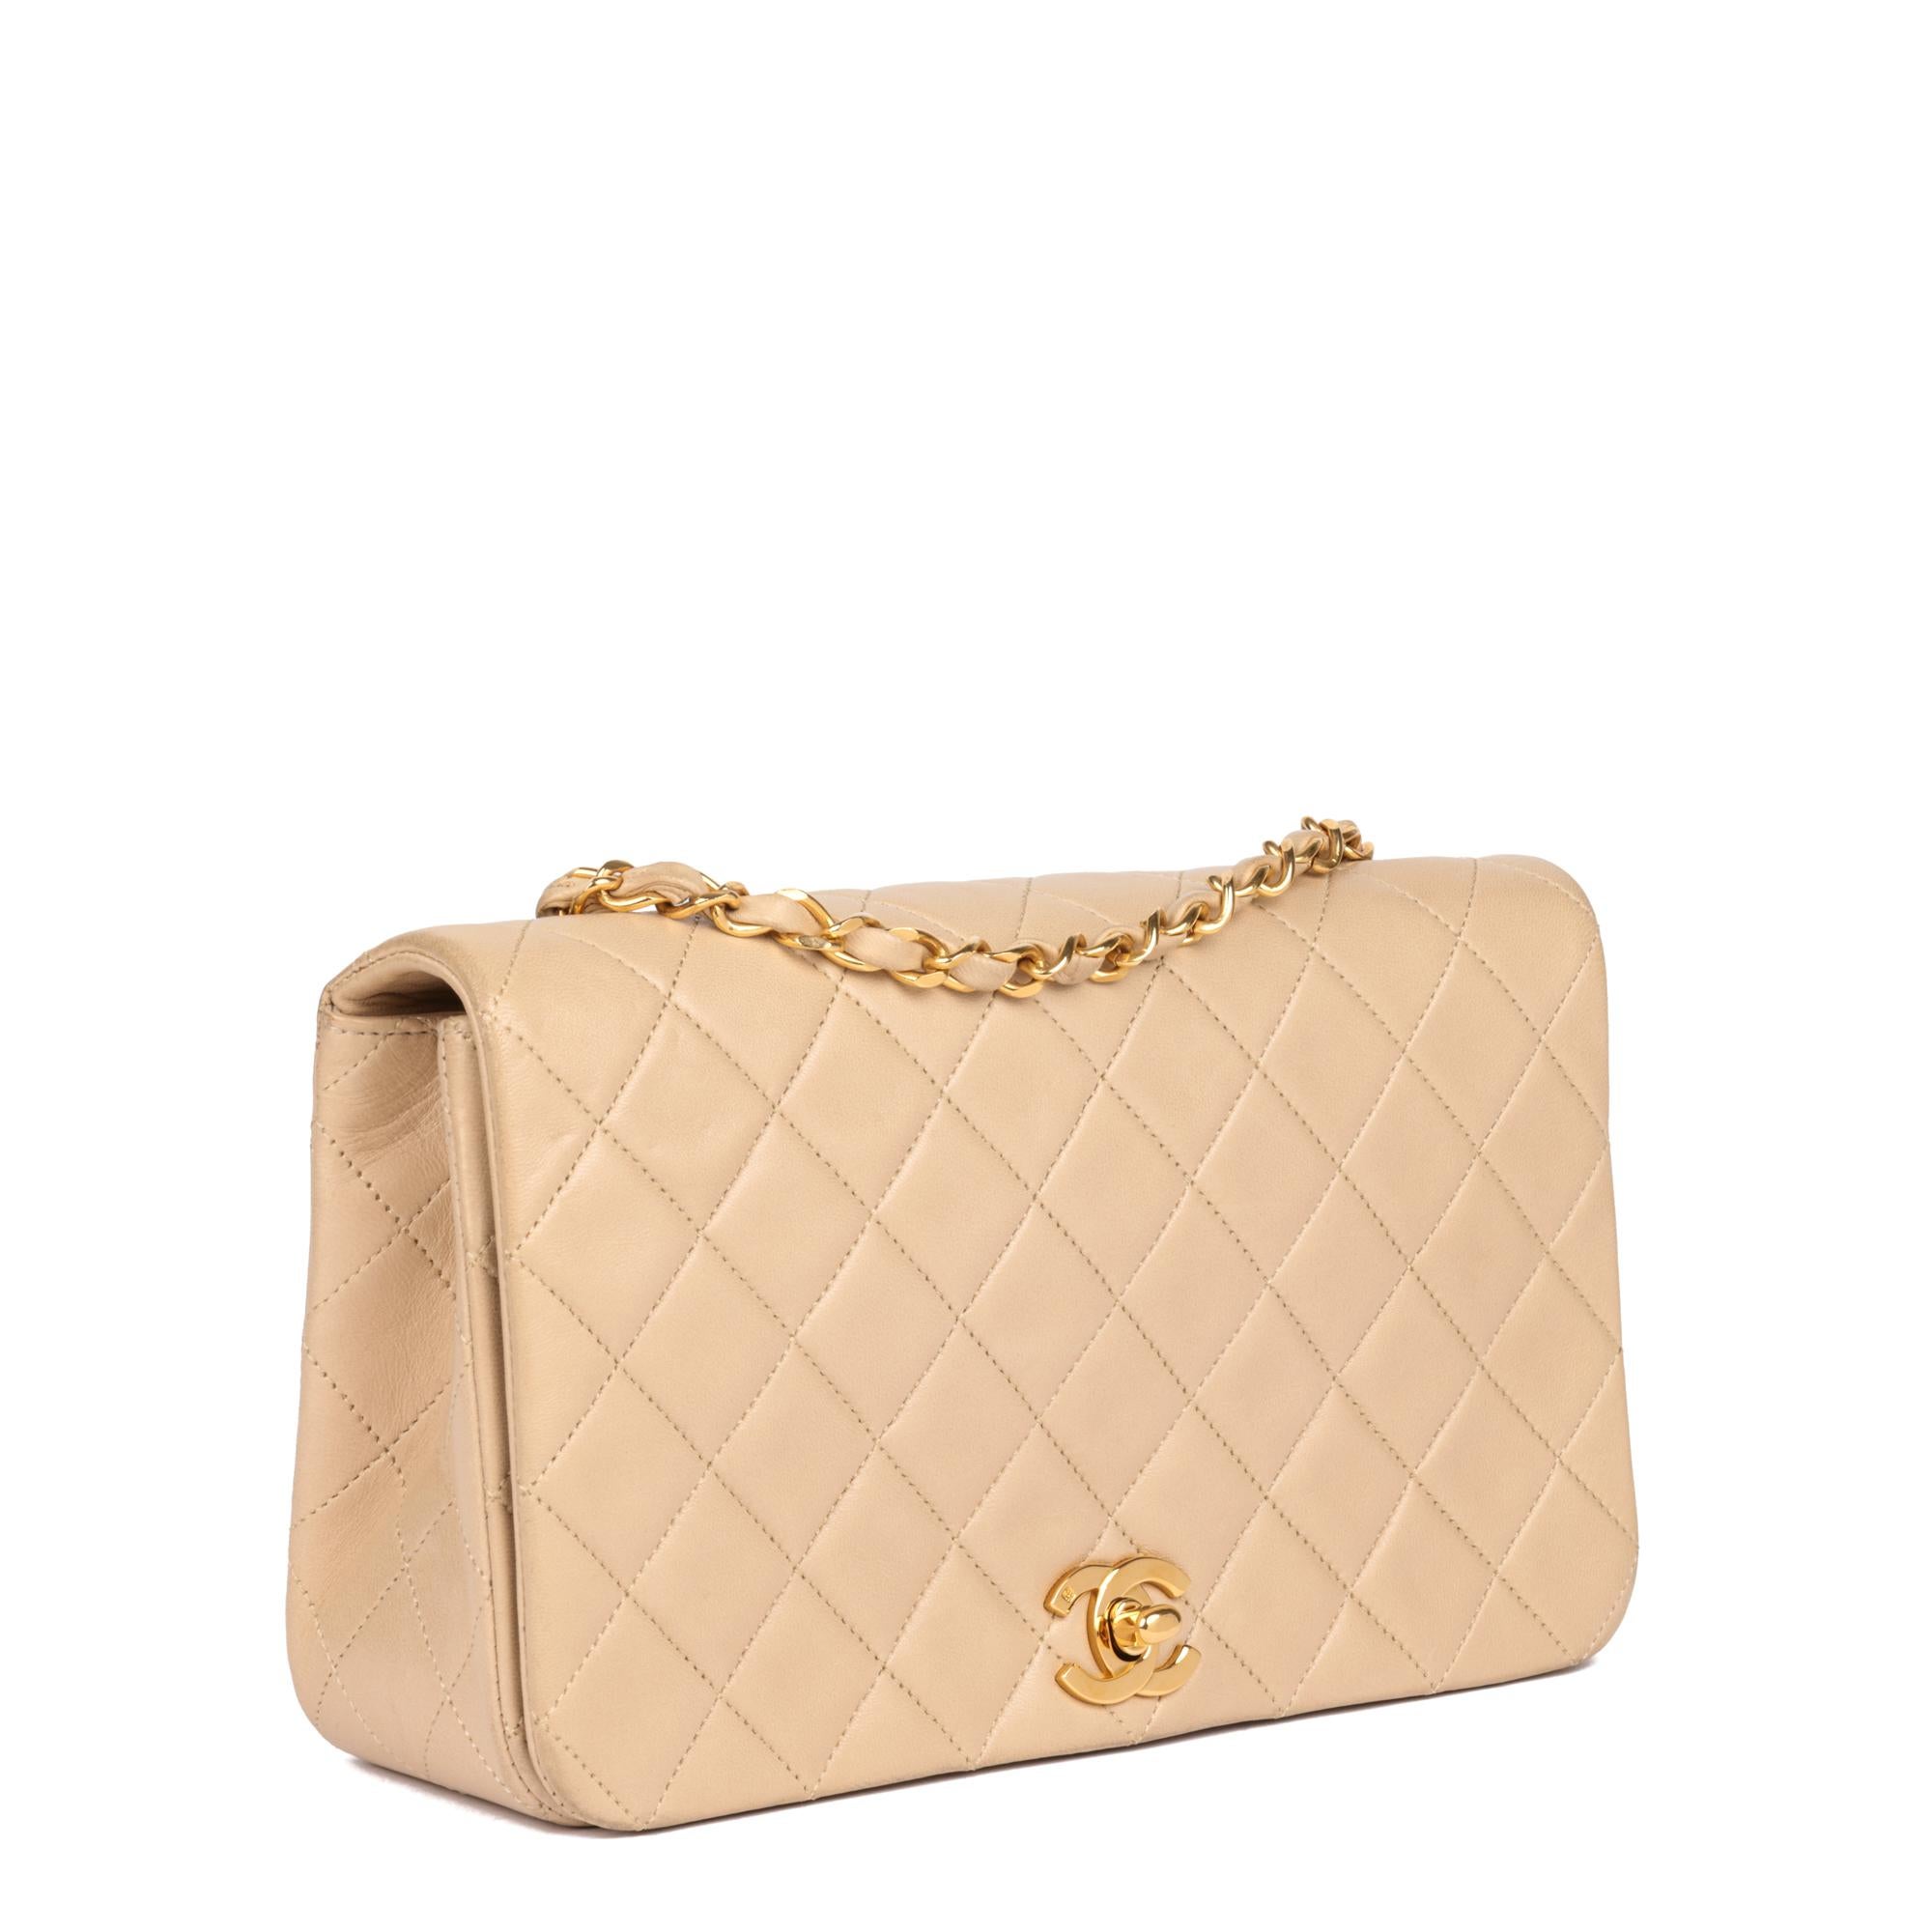 CHANEL
Light Beige Quilted Lambskin Vintage Small Classic Single Full Flap Bag

Xupes Reference: HB5250
Serial Number: 2047424
Age (Circa): 1991
Accompanied By: Chanel Dust Bag, Authenticity Card
Authenticity Details: Authenticity Card, Serial